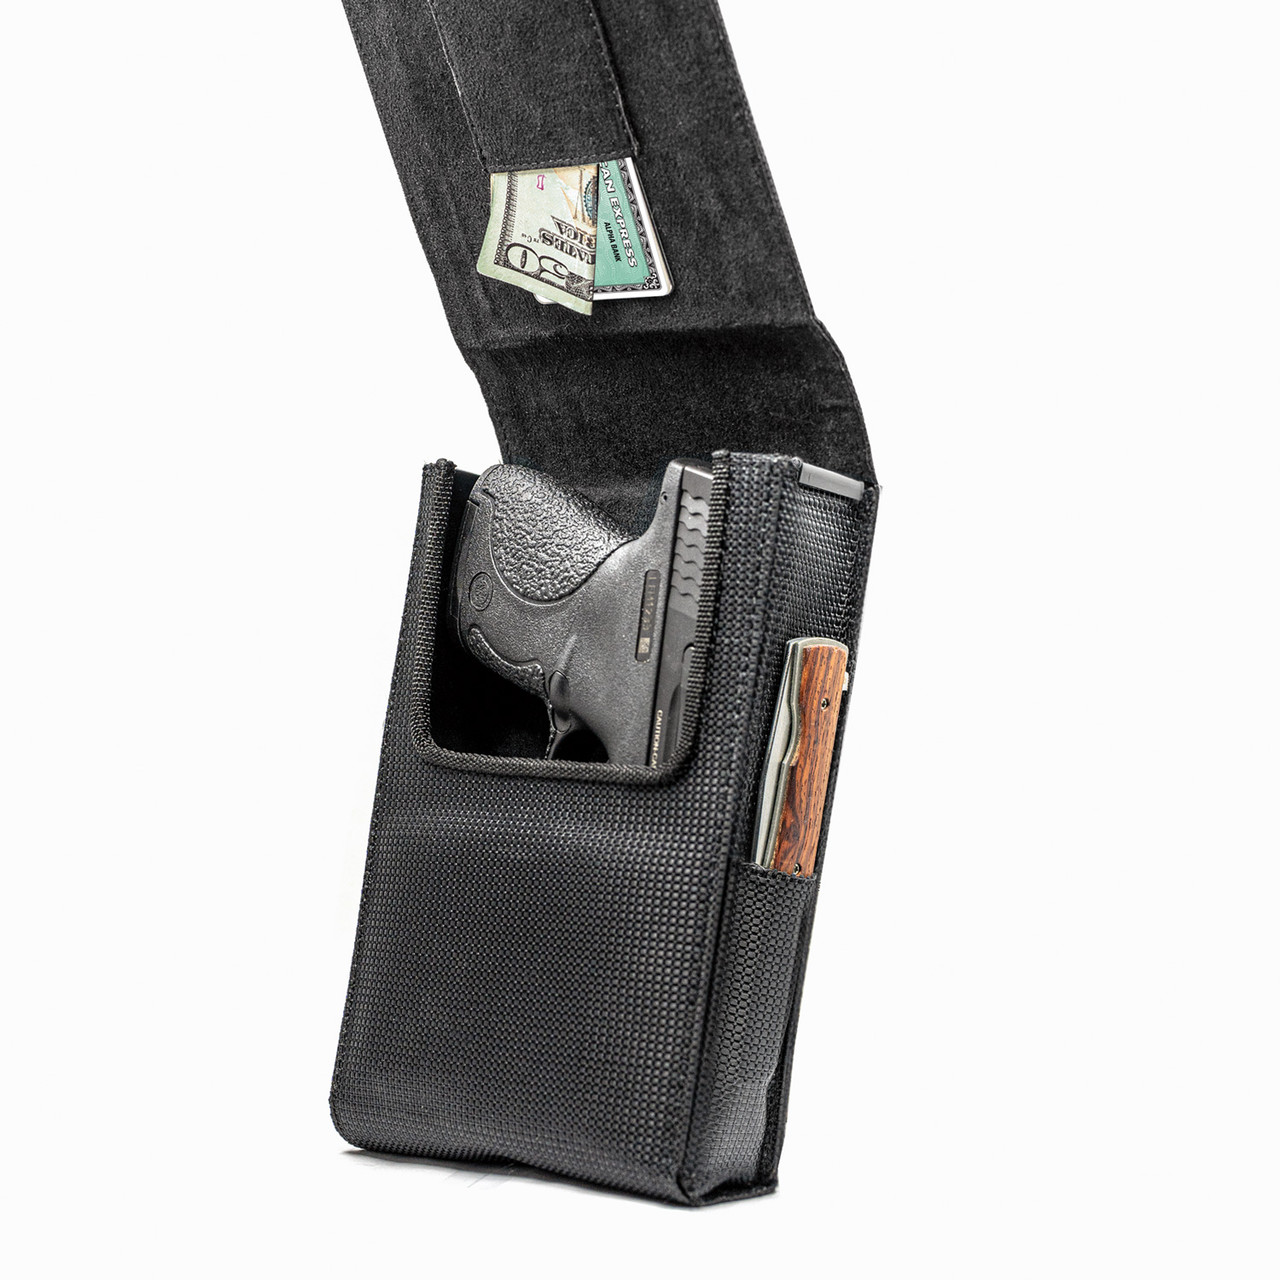 The Springfield XDE 9mm Perfect Holster